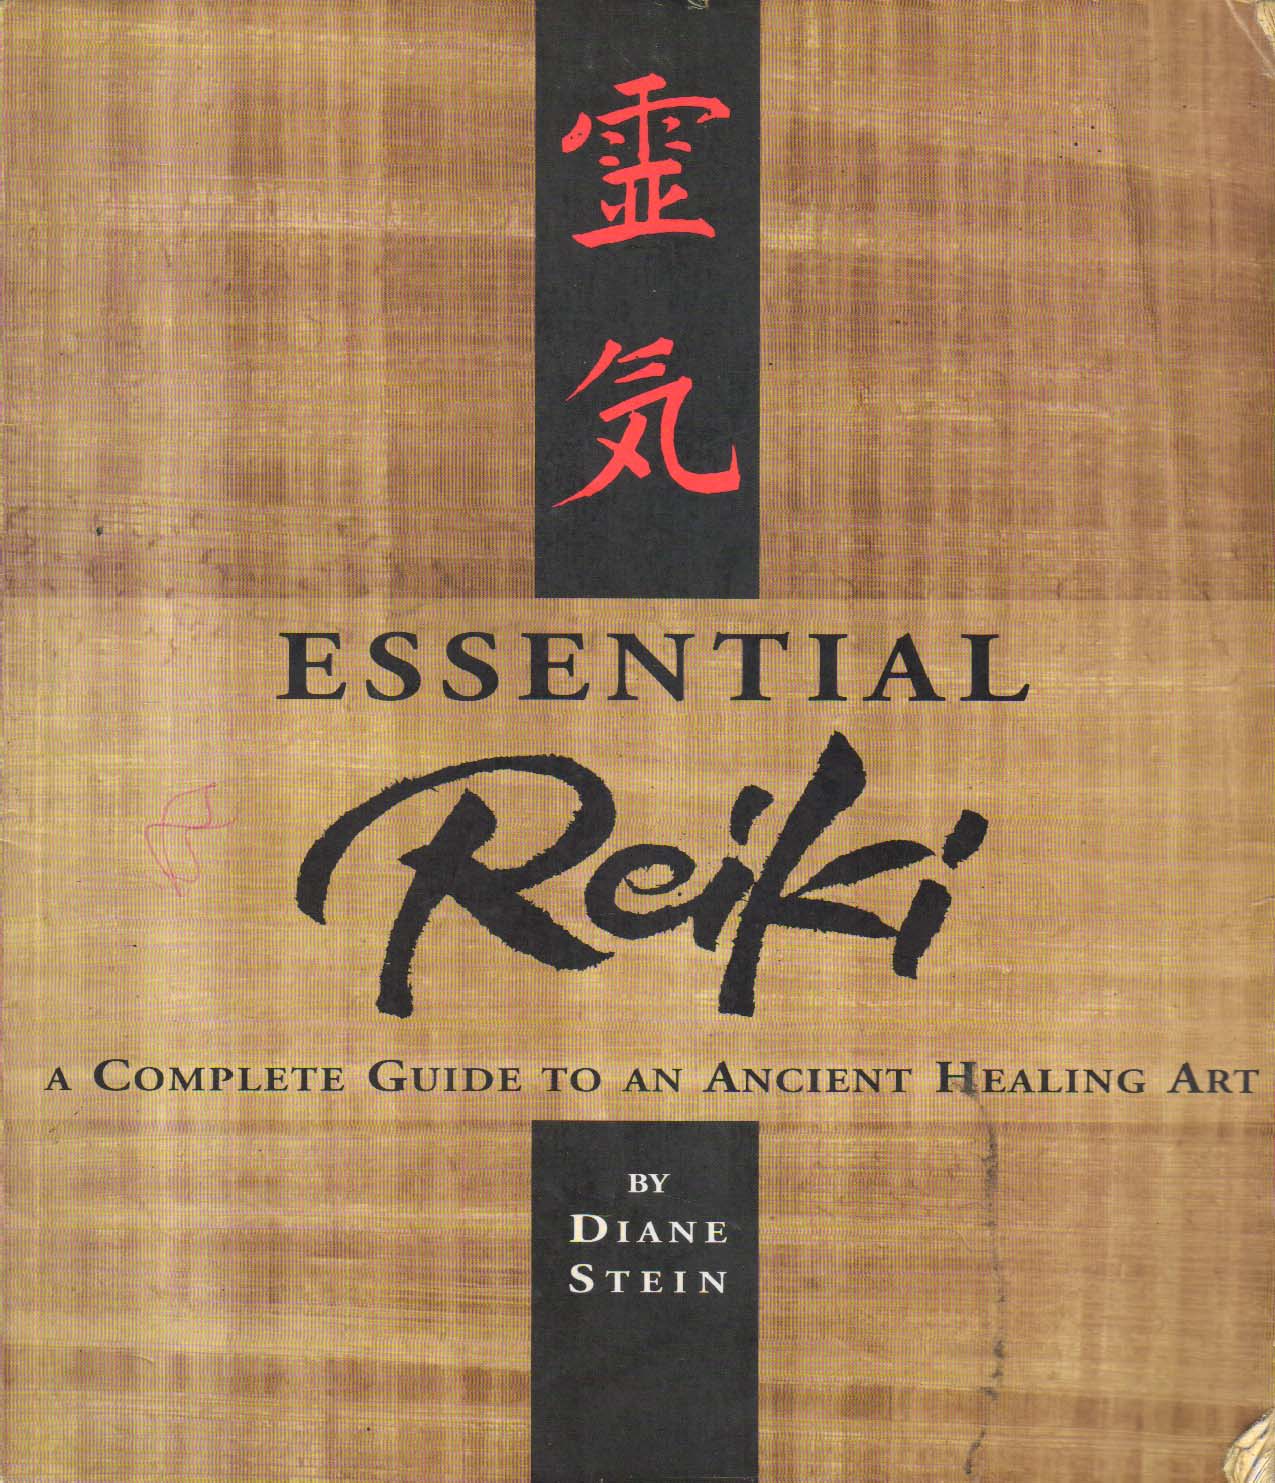 Essential Reiki  A Complete Guide to an Ancient Healing Srt